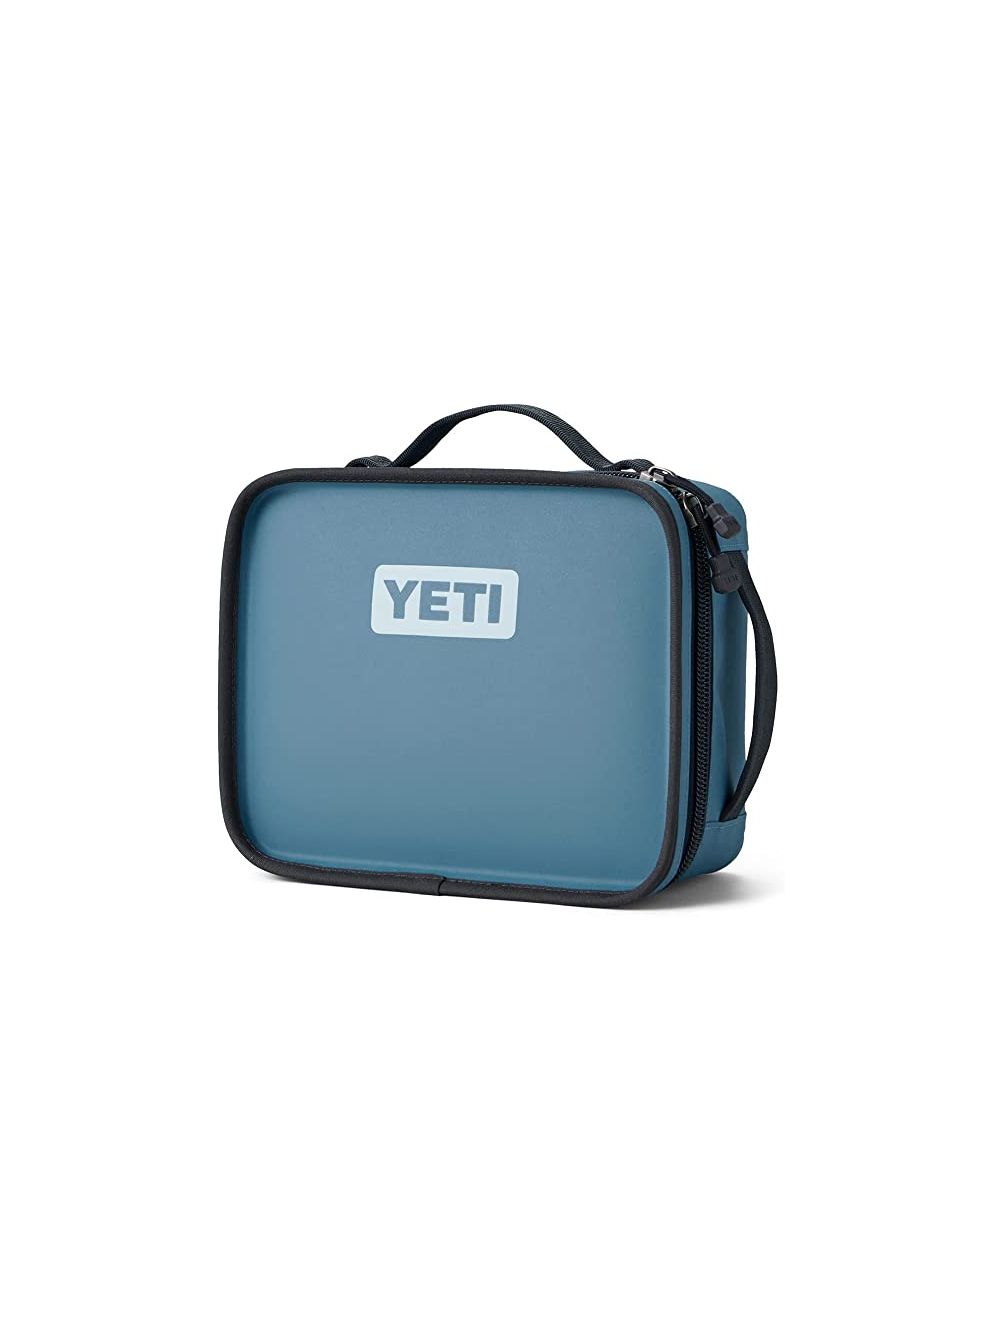  YETI Daytrip Packable Lunch Bag, Nordic Blue: Home